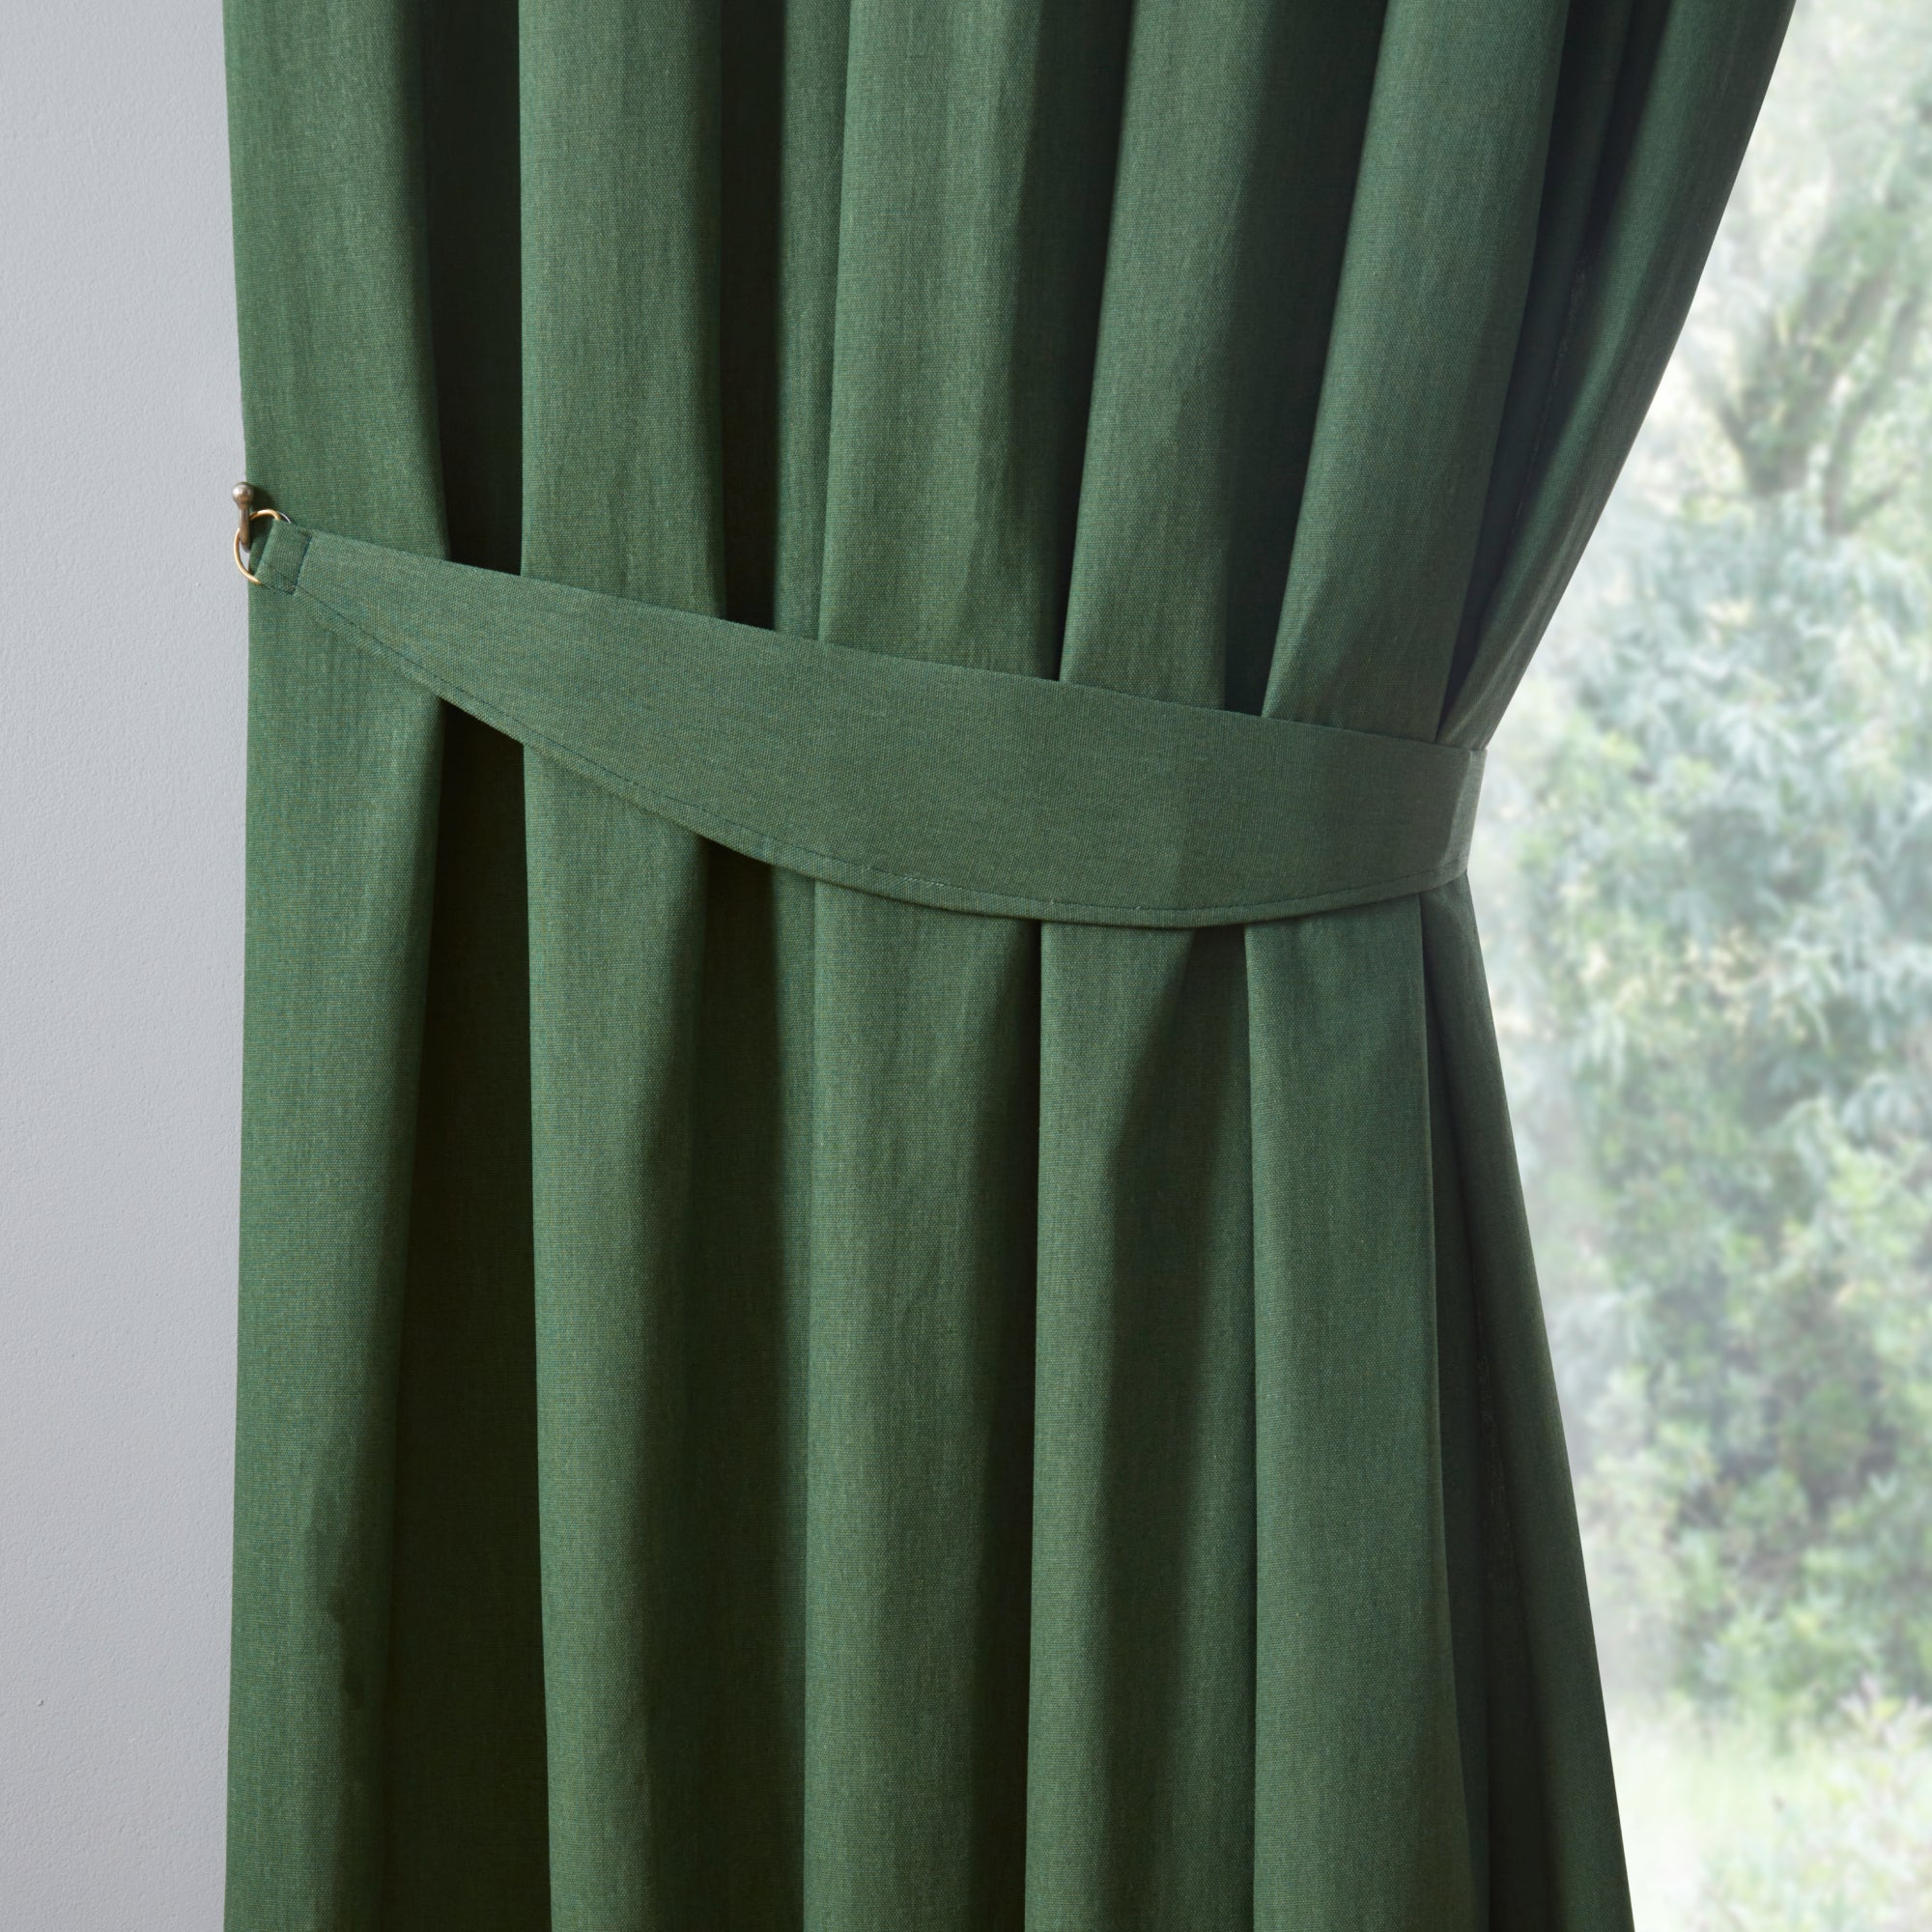 Pair of Pencil Pleat Curtains Dijon by Fusion in Bottle Green